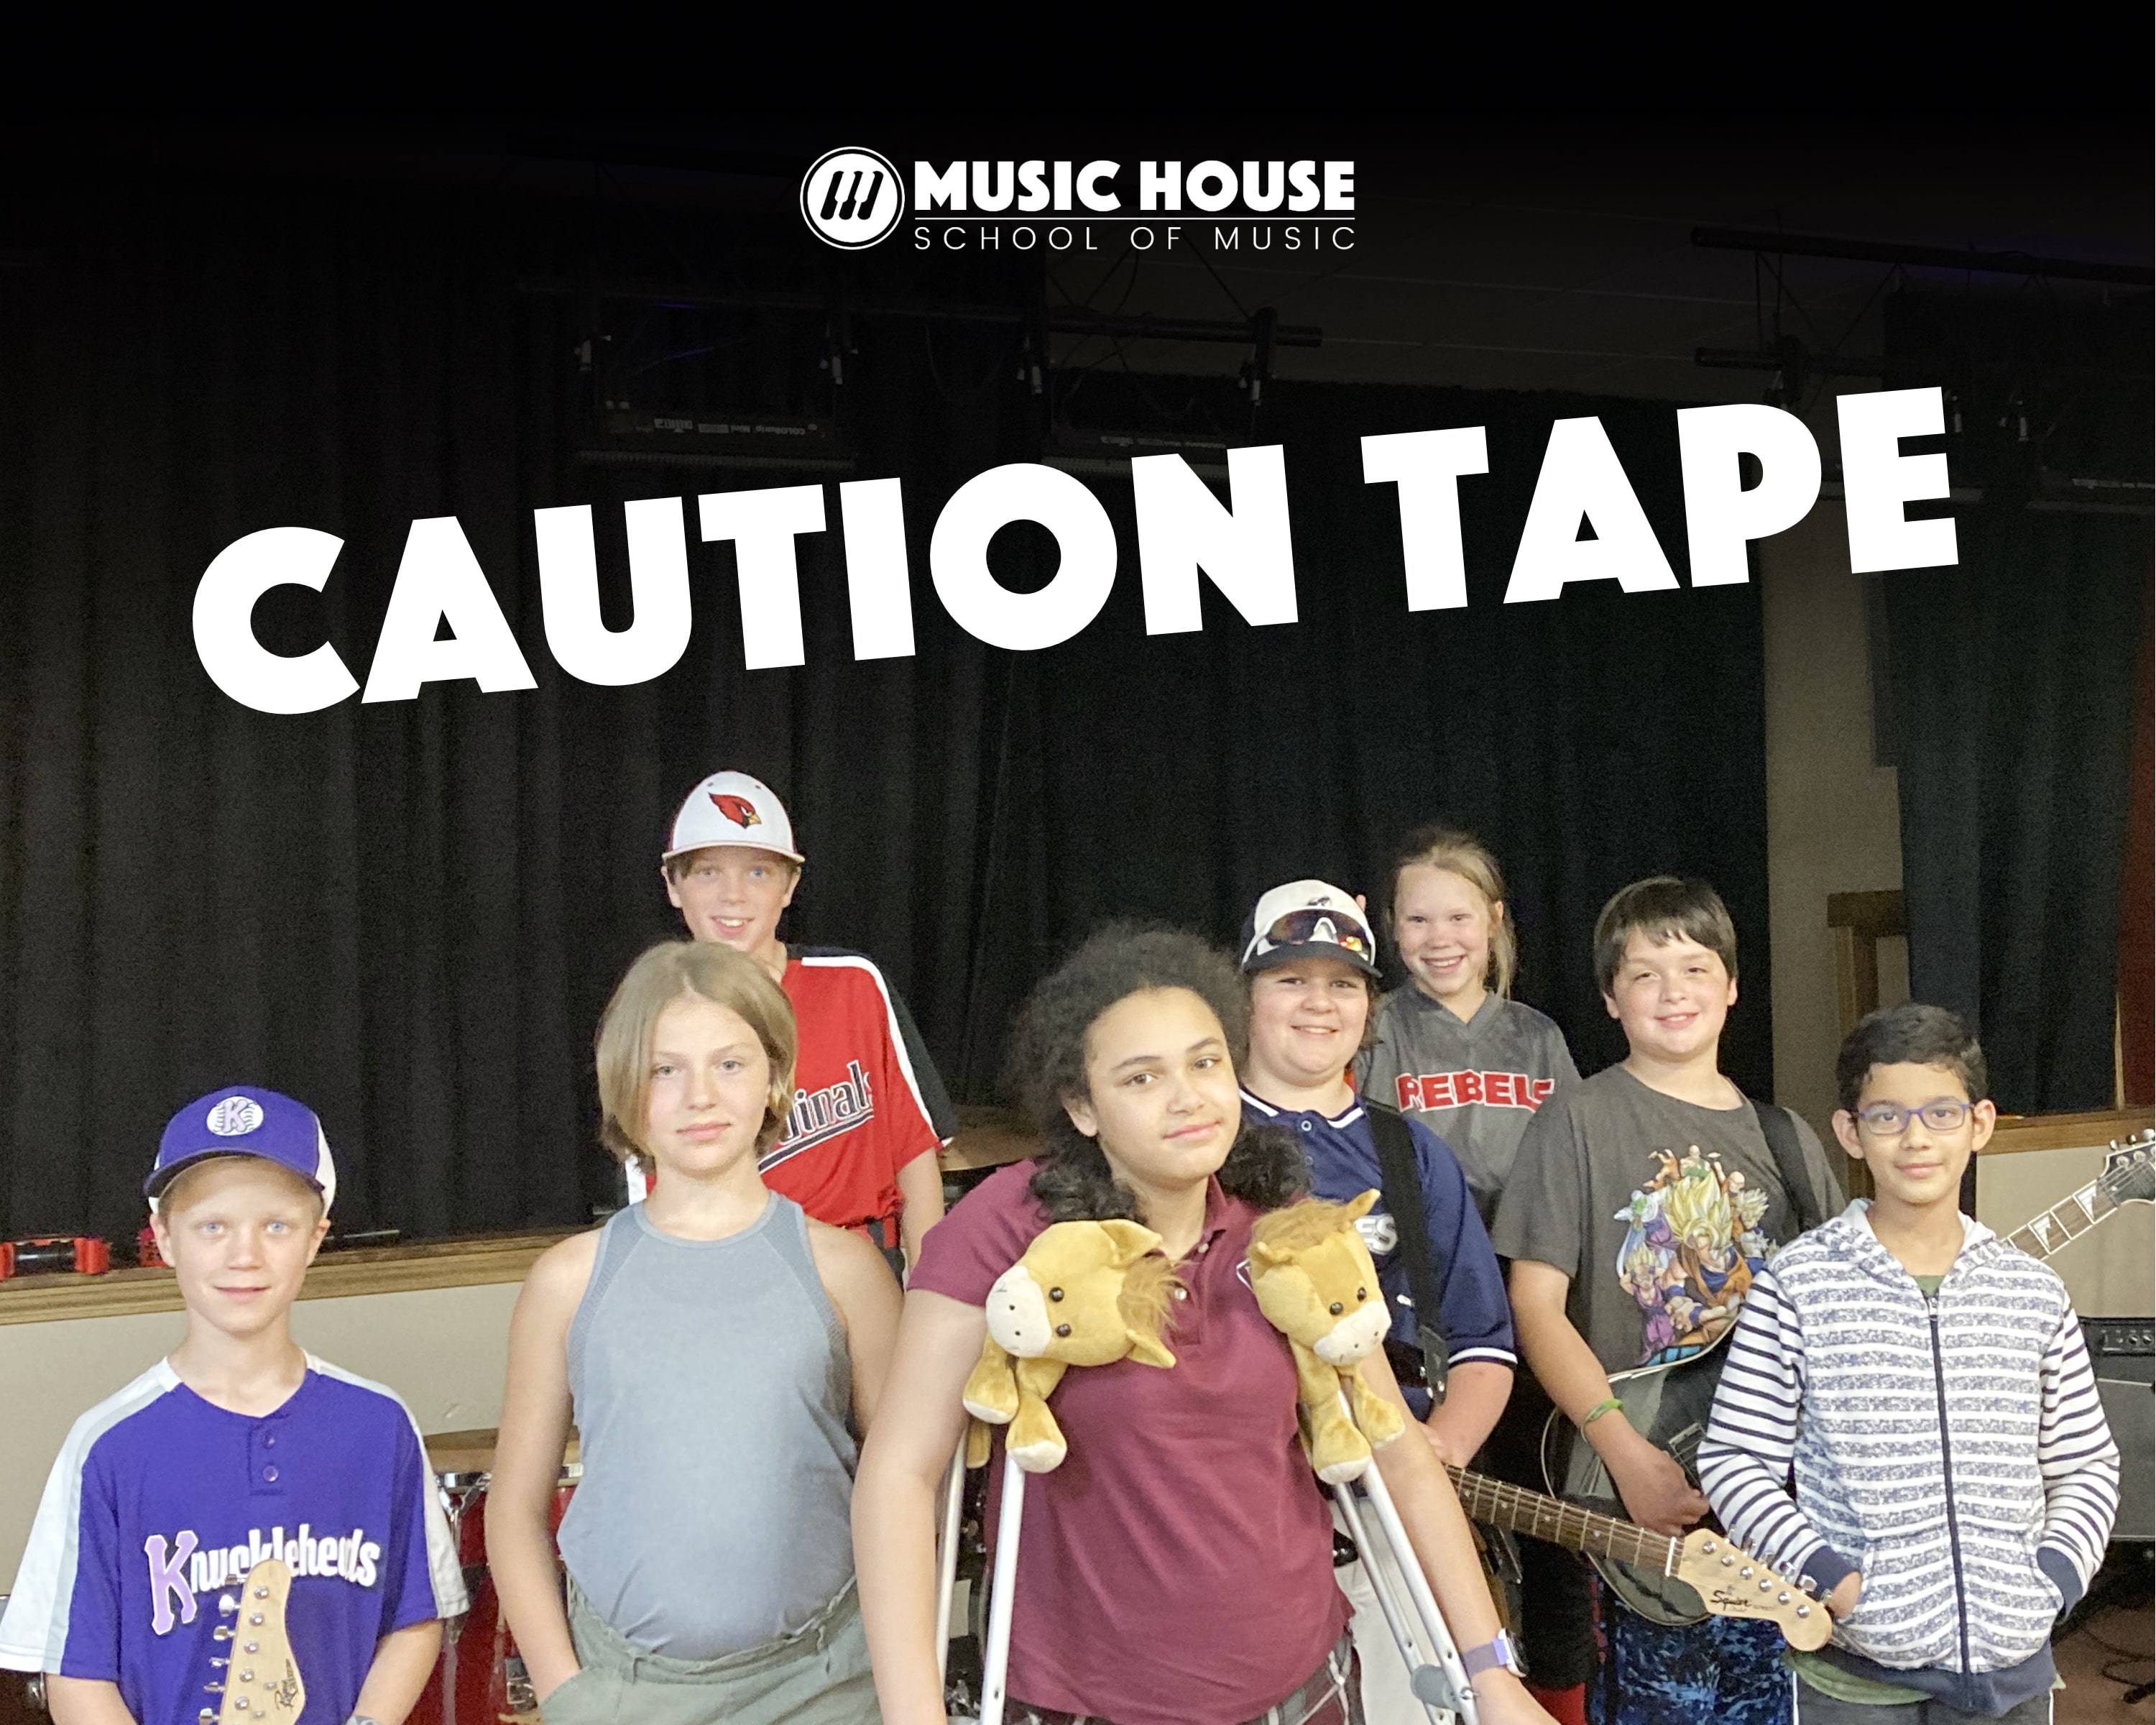 The student band 'Caution Tape'